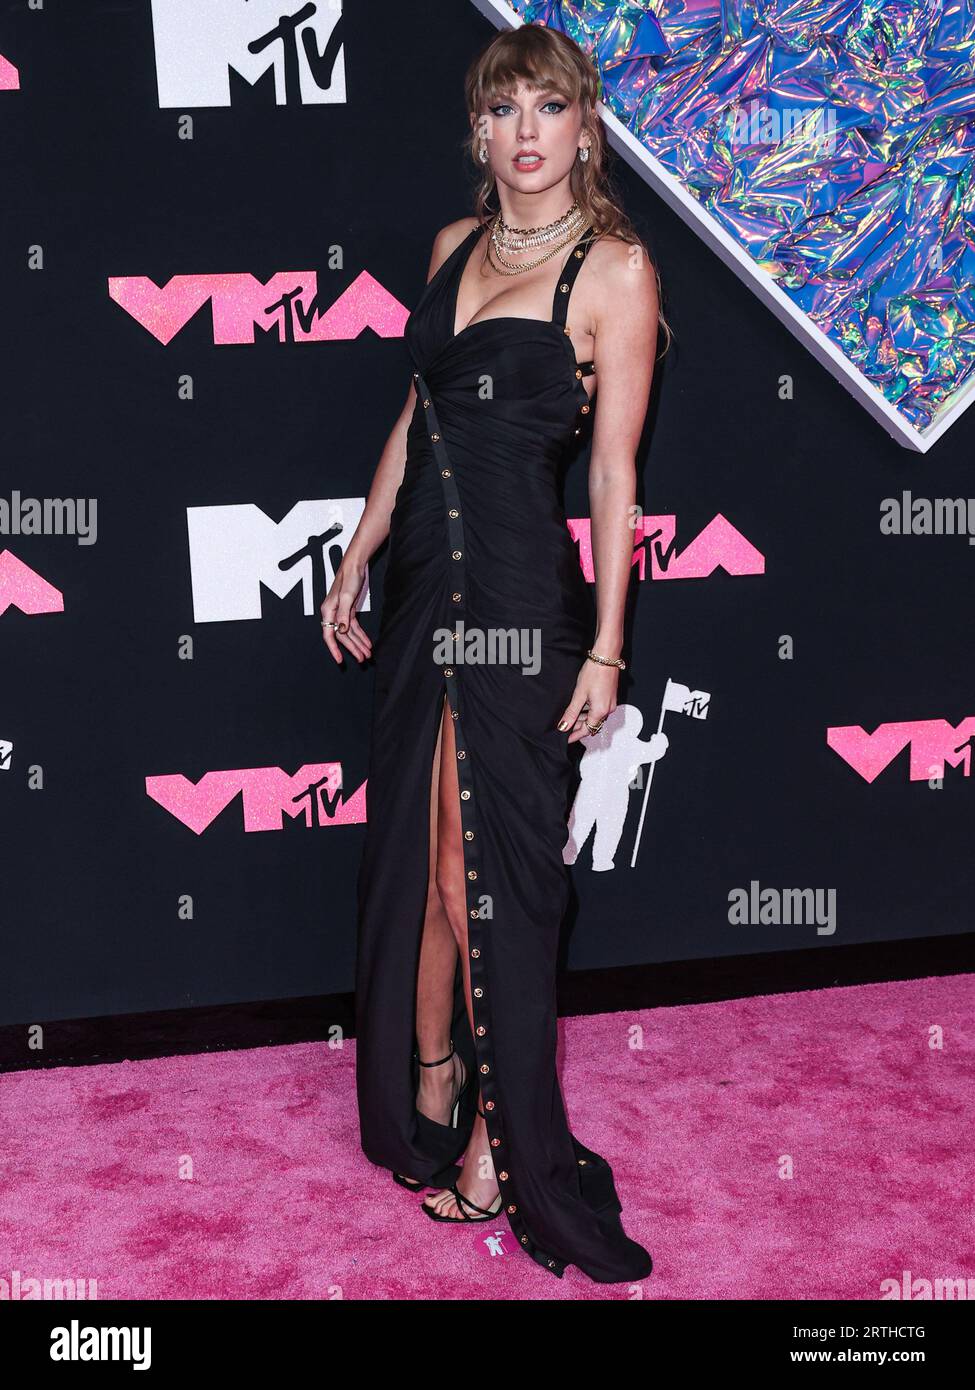 NEWARK, NEW JERSEY, USA - SEPTEMBER 12: American singer-songwriter Taylor Swift wearing a Versace dress arrives at the 2023 MTV Video Music Awards held at the Prudential Center on September 12, 2023 in Newark, New Jersey, United States. (Photo by Xavier Collin/Image Press Agency) Stock Photo